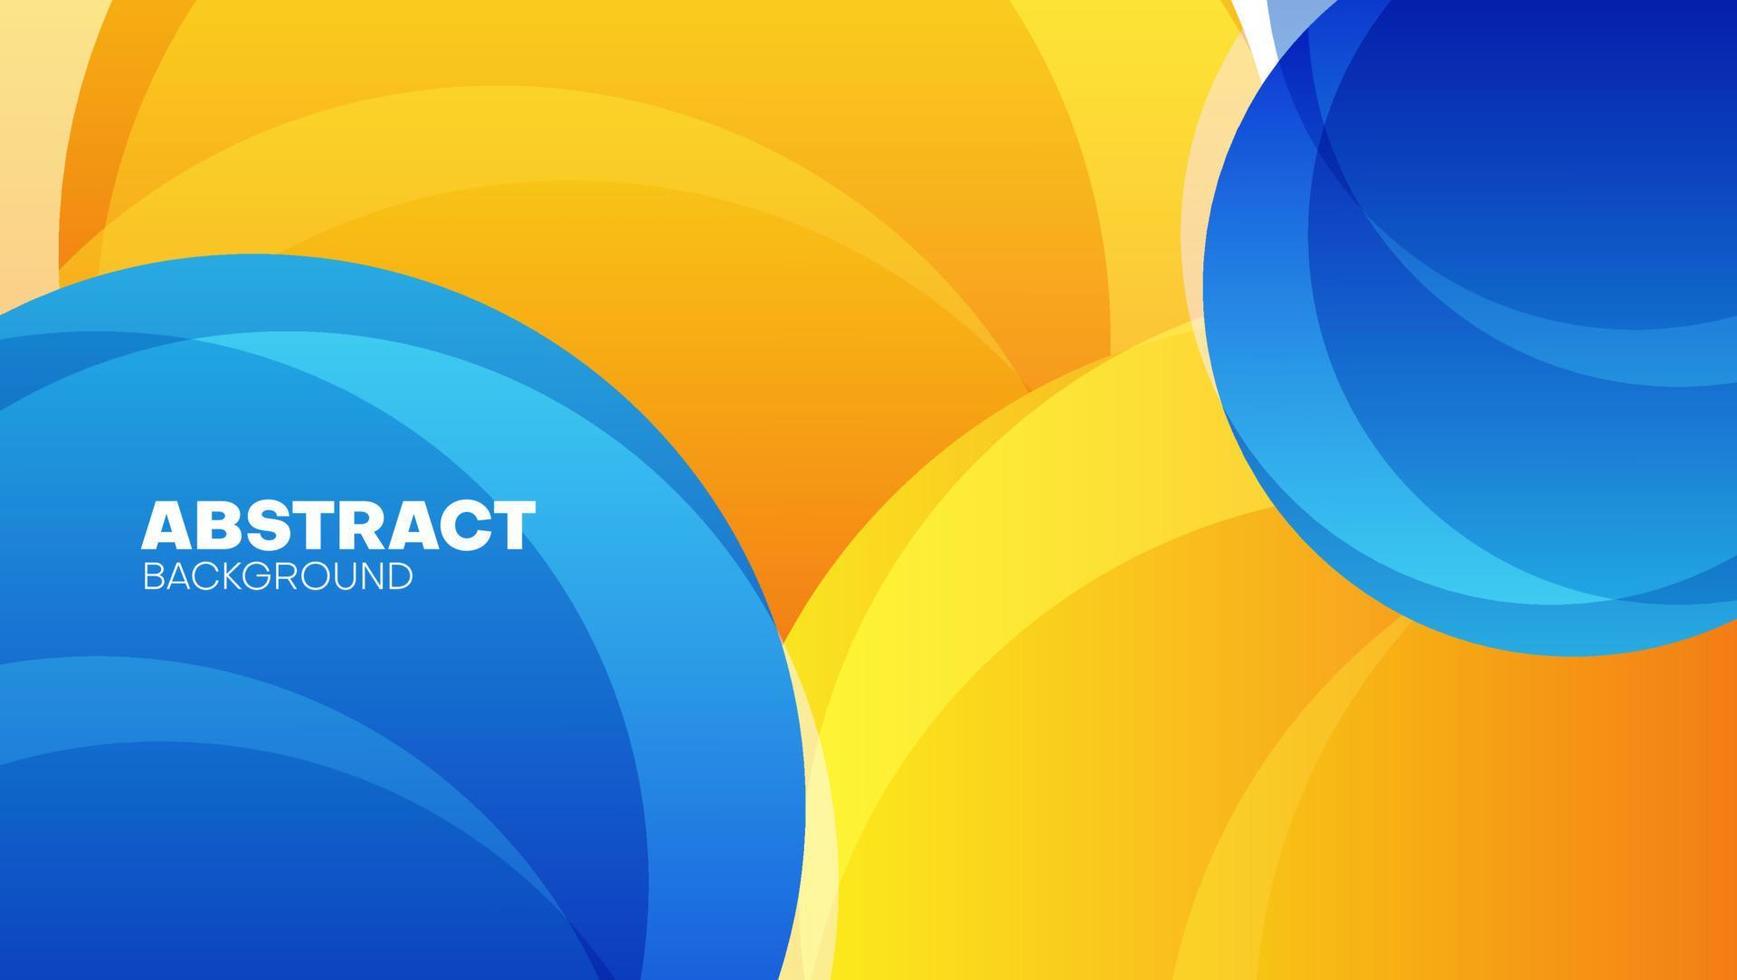 abstract blue and orange circular background. vector illustration